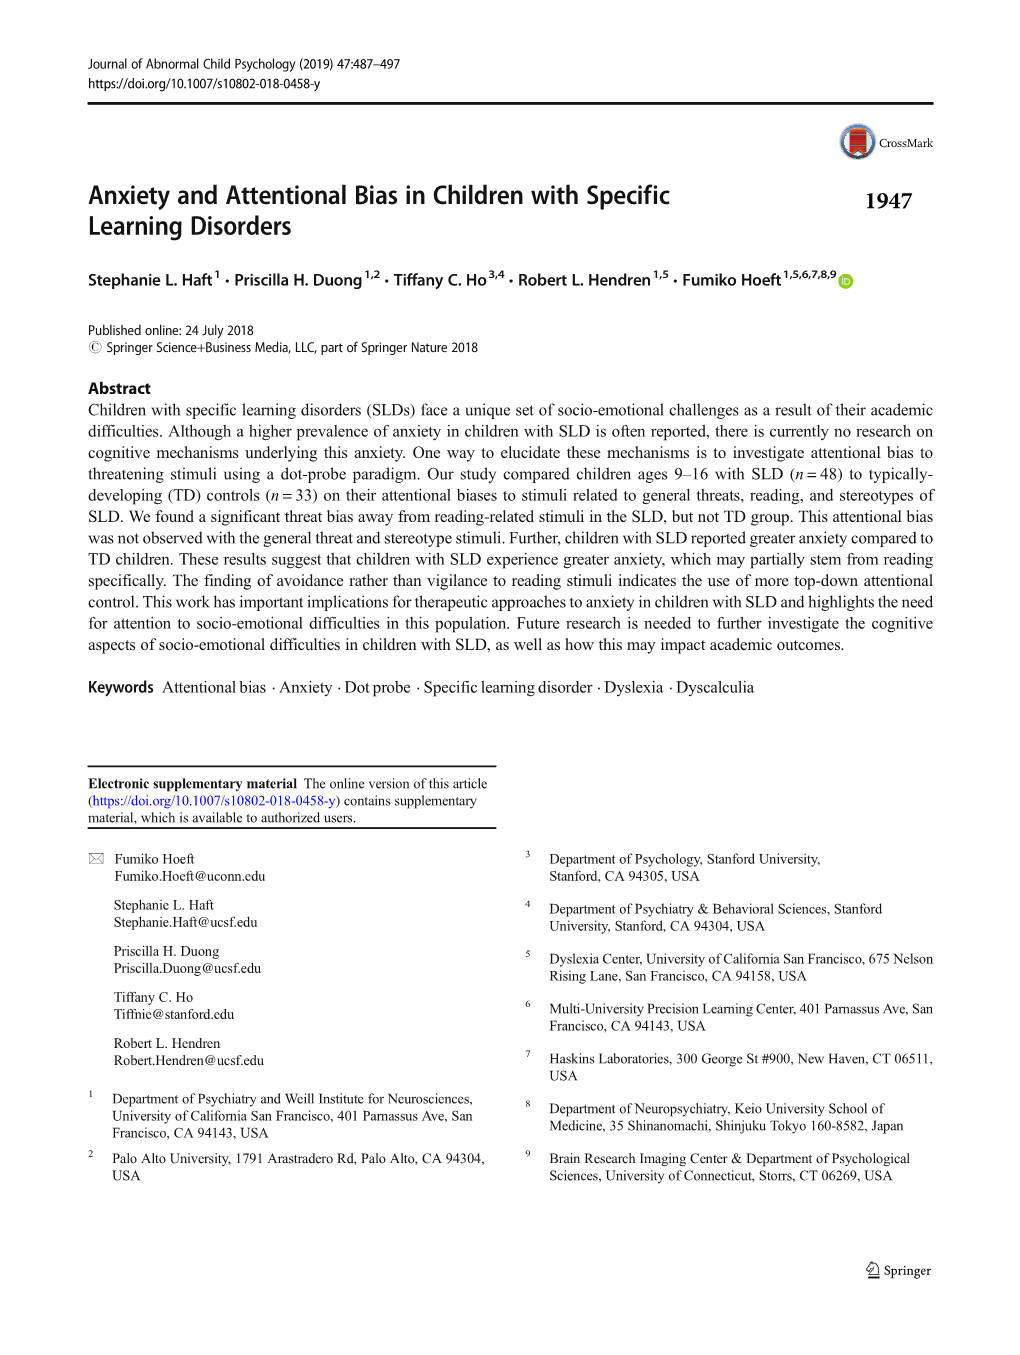 Anxiety and Attentional Bias in Children with Specific Learning